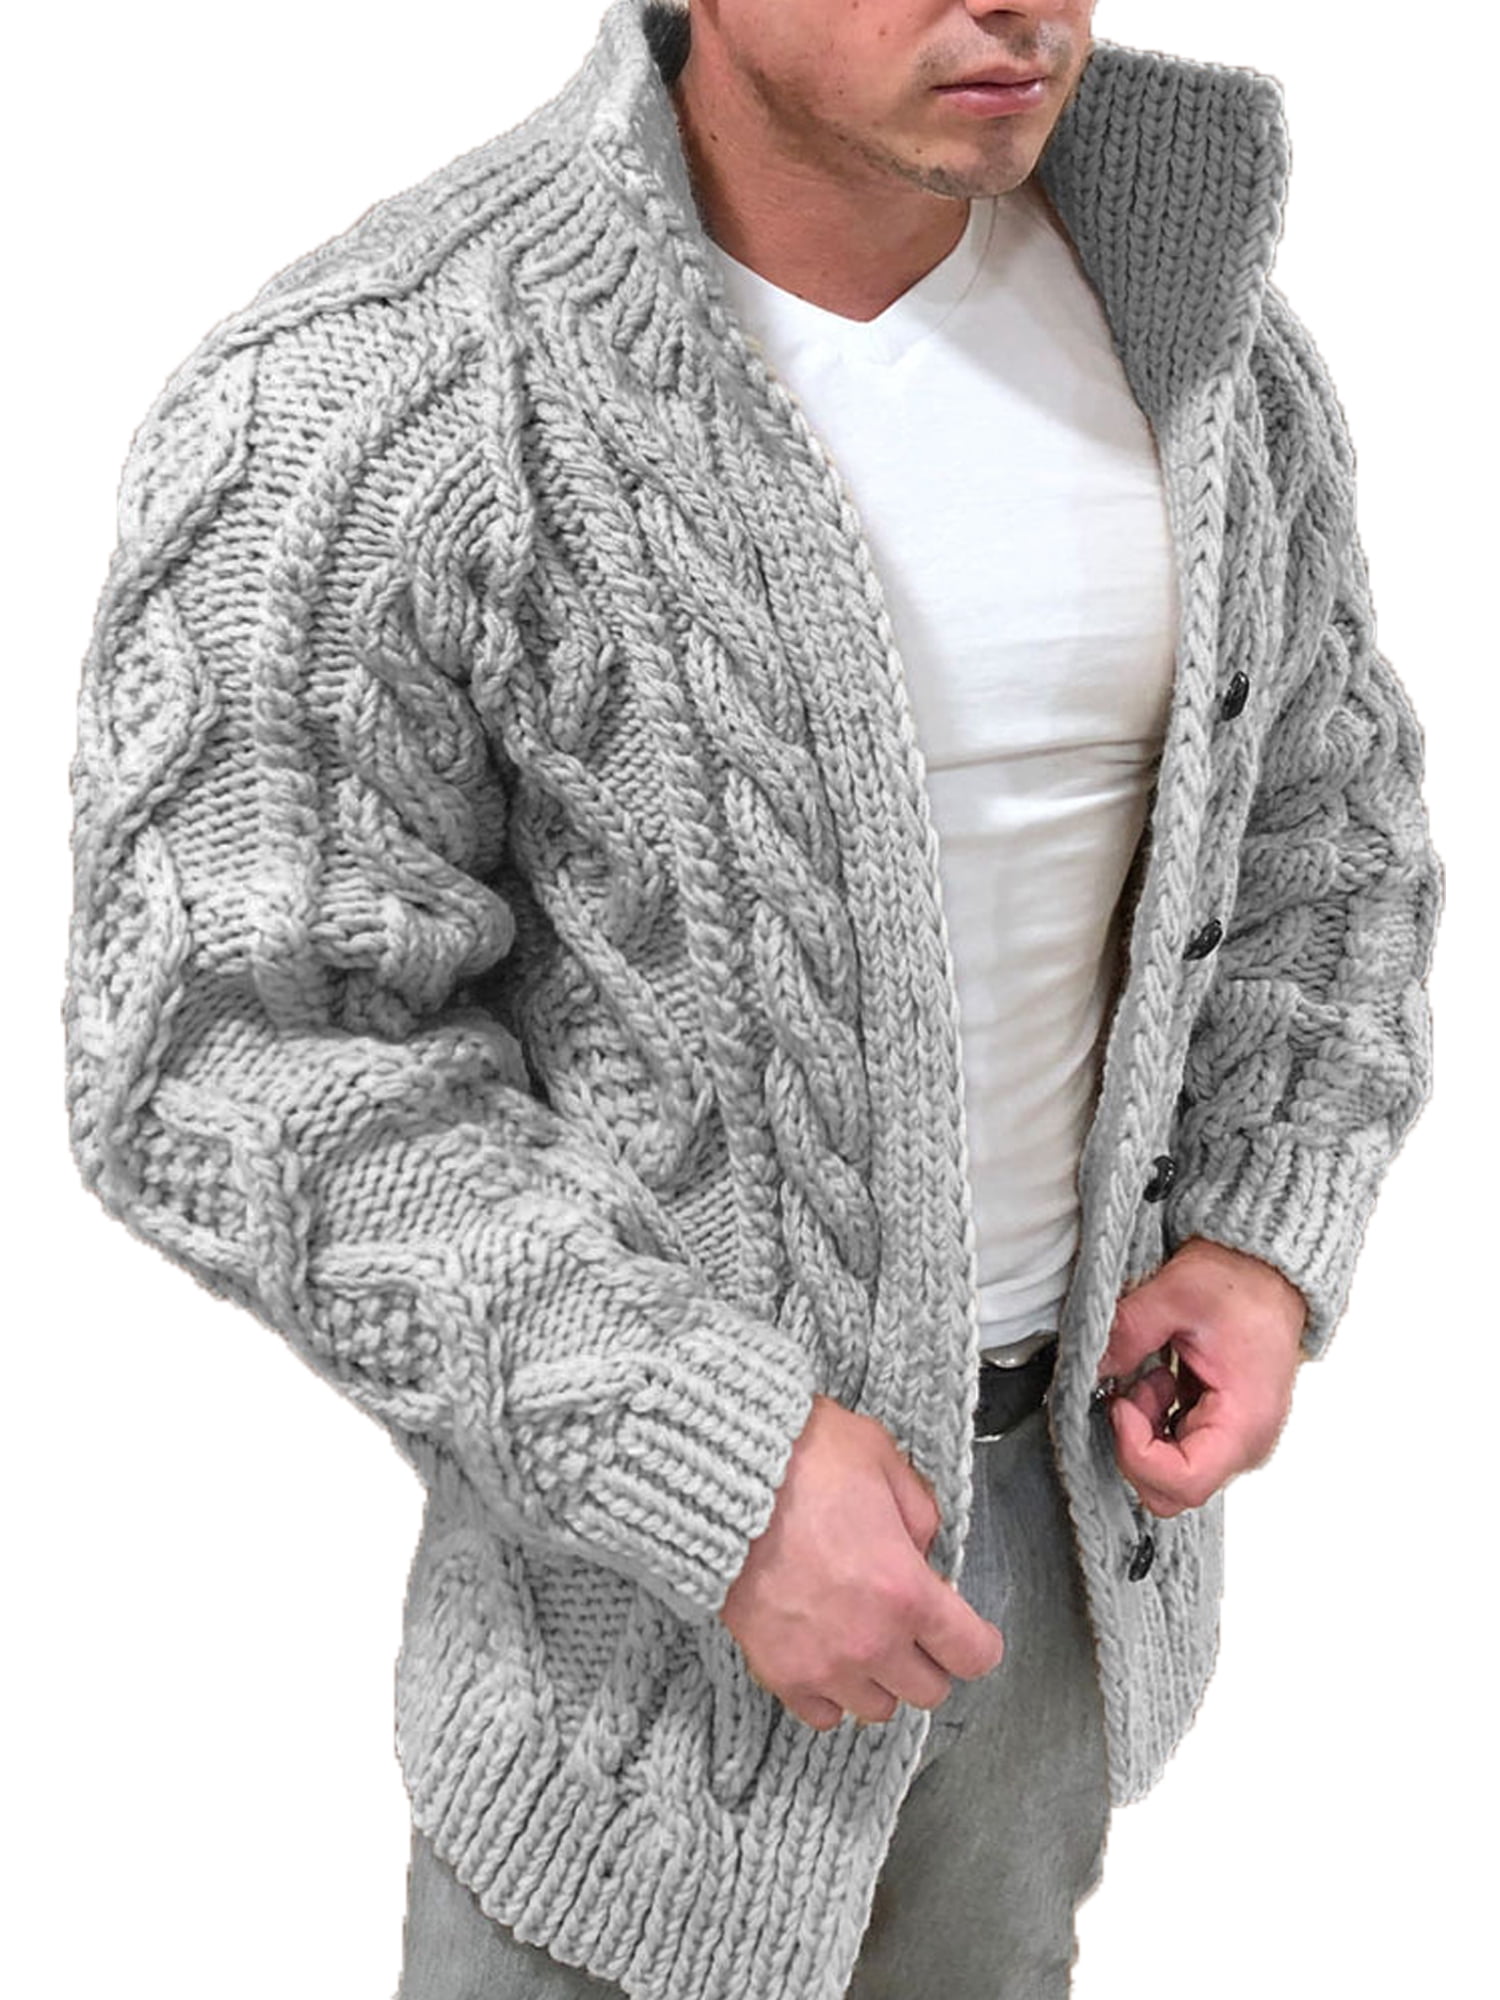 YOUTHUP Mens Cardigan Turtleneck Cable Knit Sweater Winter Thick Knitwear Jumper 